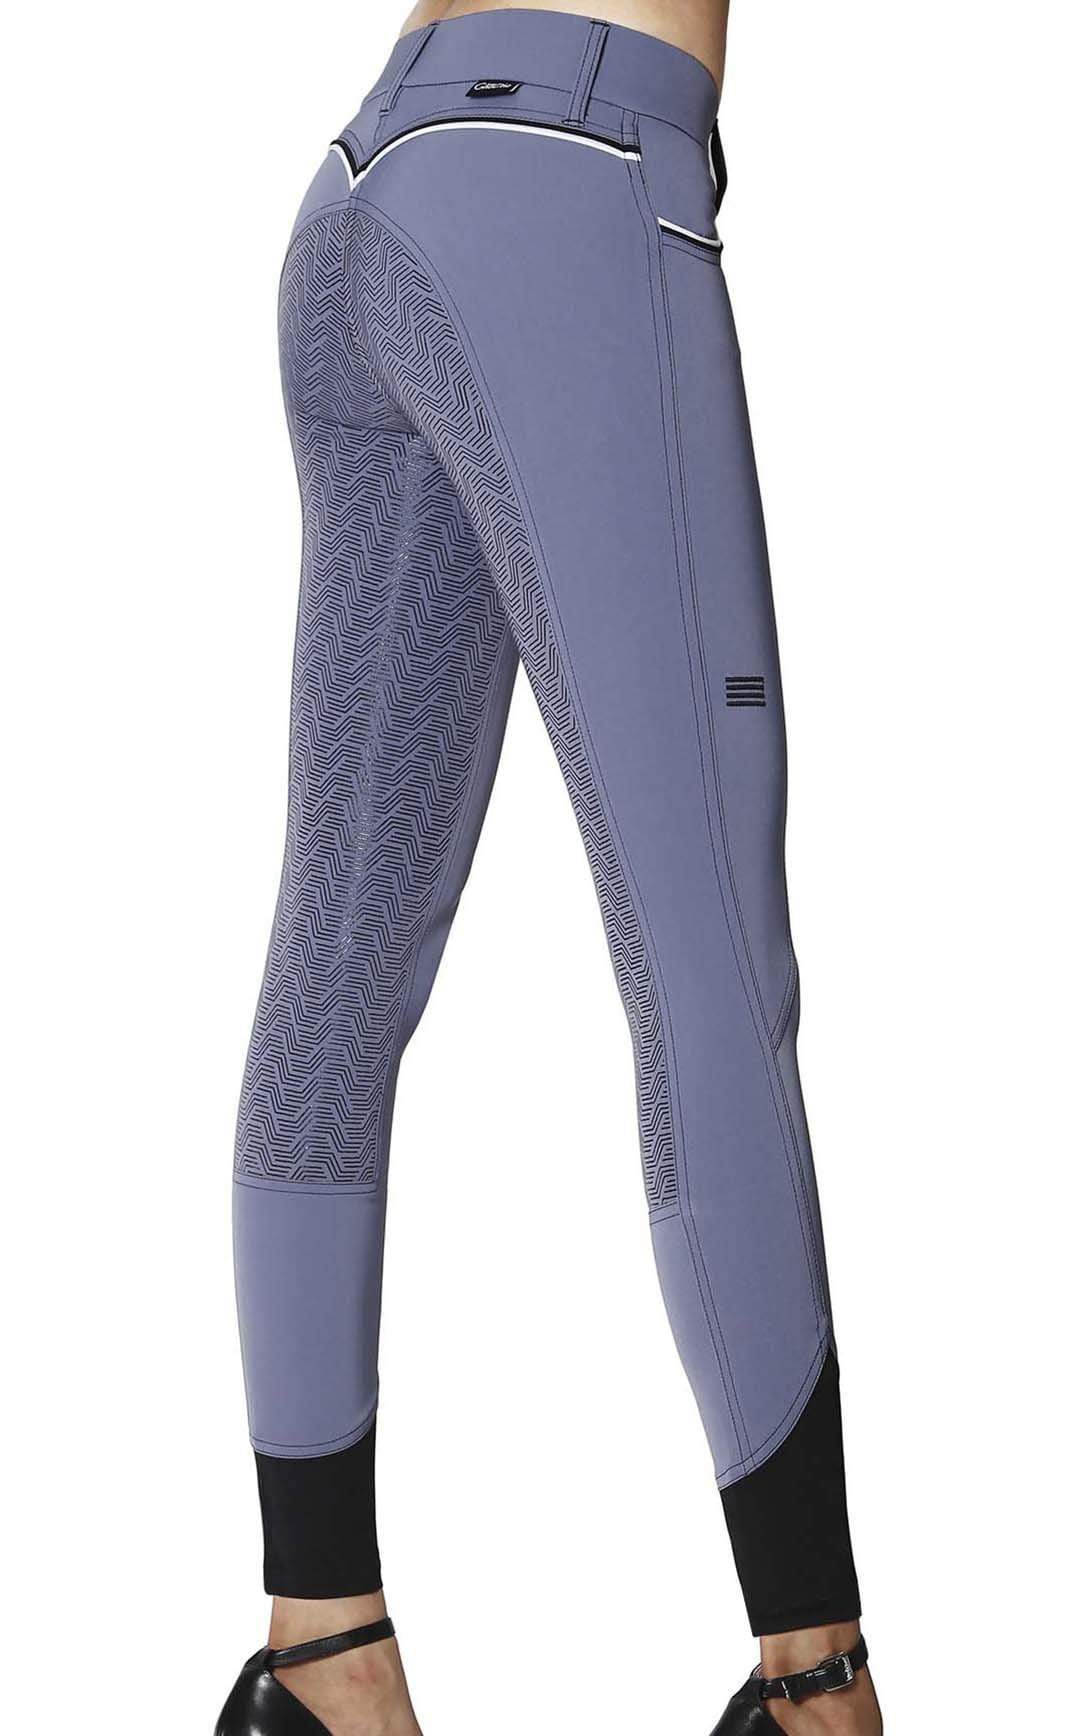 GhoDho Breeches Sky / sz 30 GhoDho Adena Full Seat Breeches equestrian team apparel online tack store mobile tack store custom farm apparel custom show stable clothing equestrian lifestyle horse show clothing riding clothes horses equestrian tack store